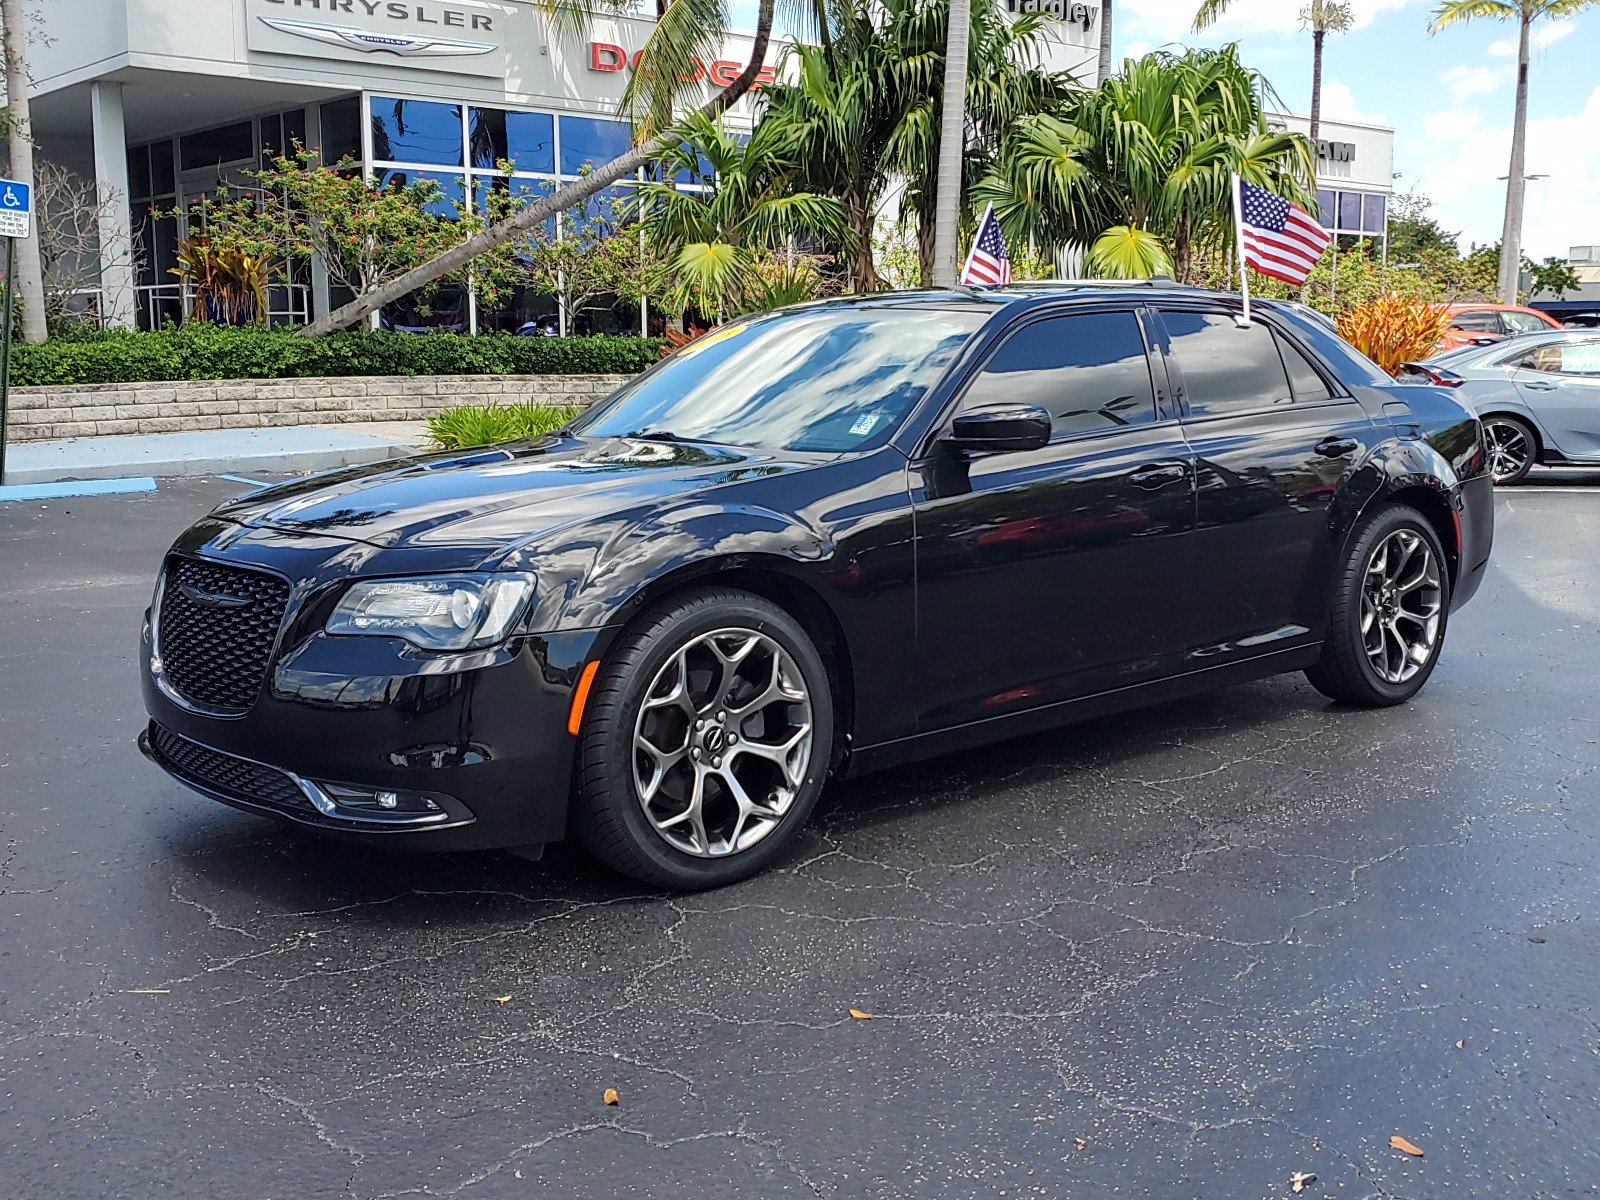 PreOwned 2016 Chrysler 300 300S 4dr Car in Plantation